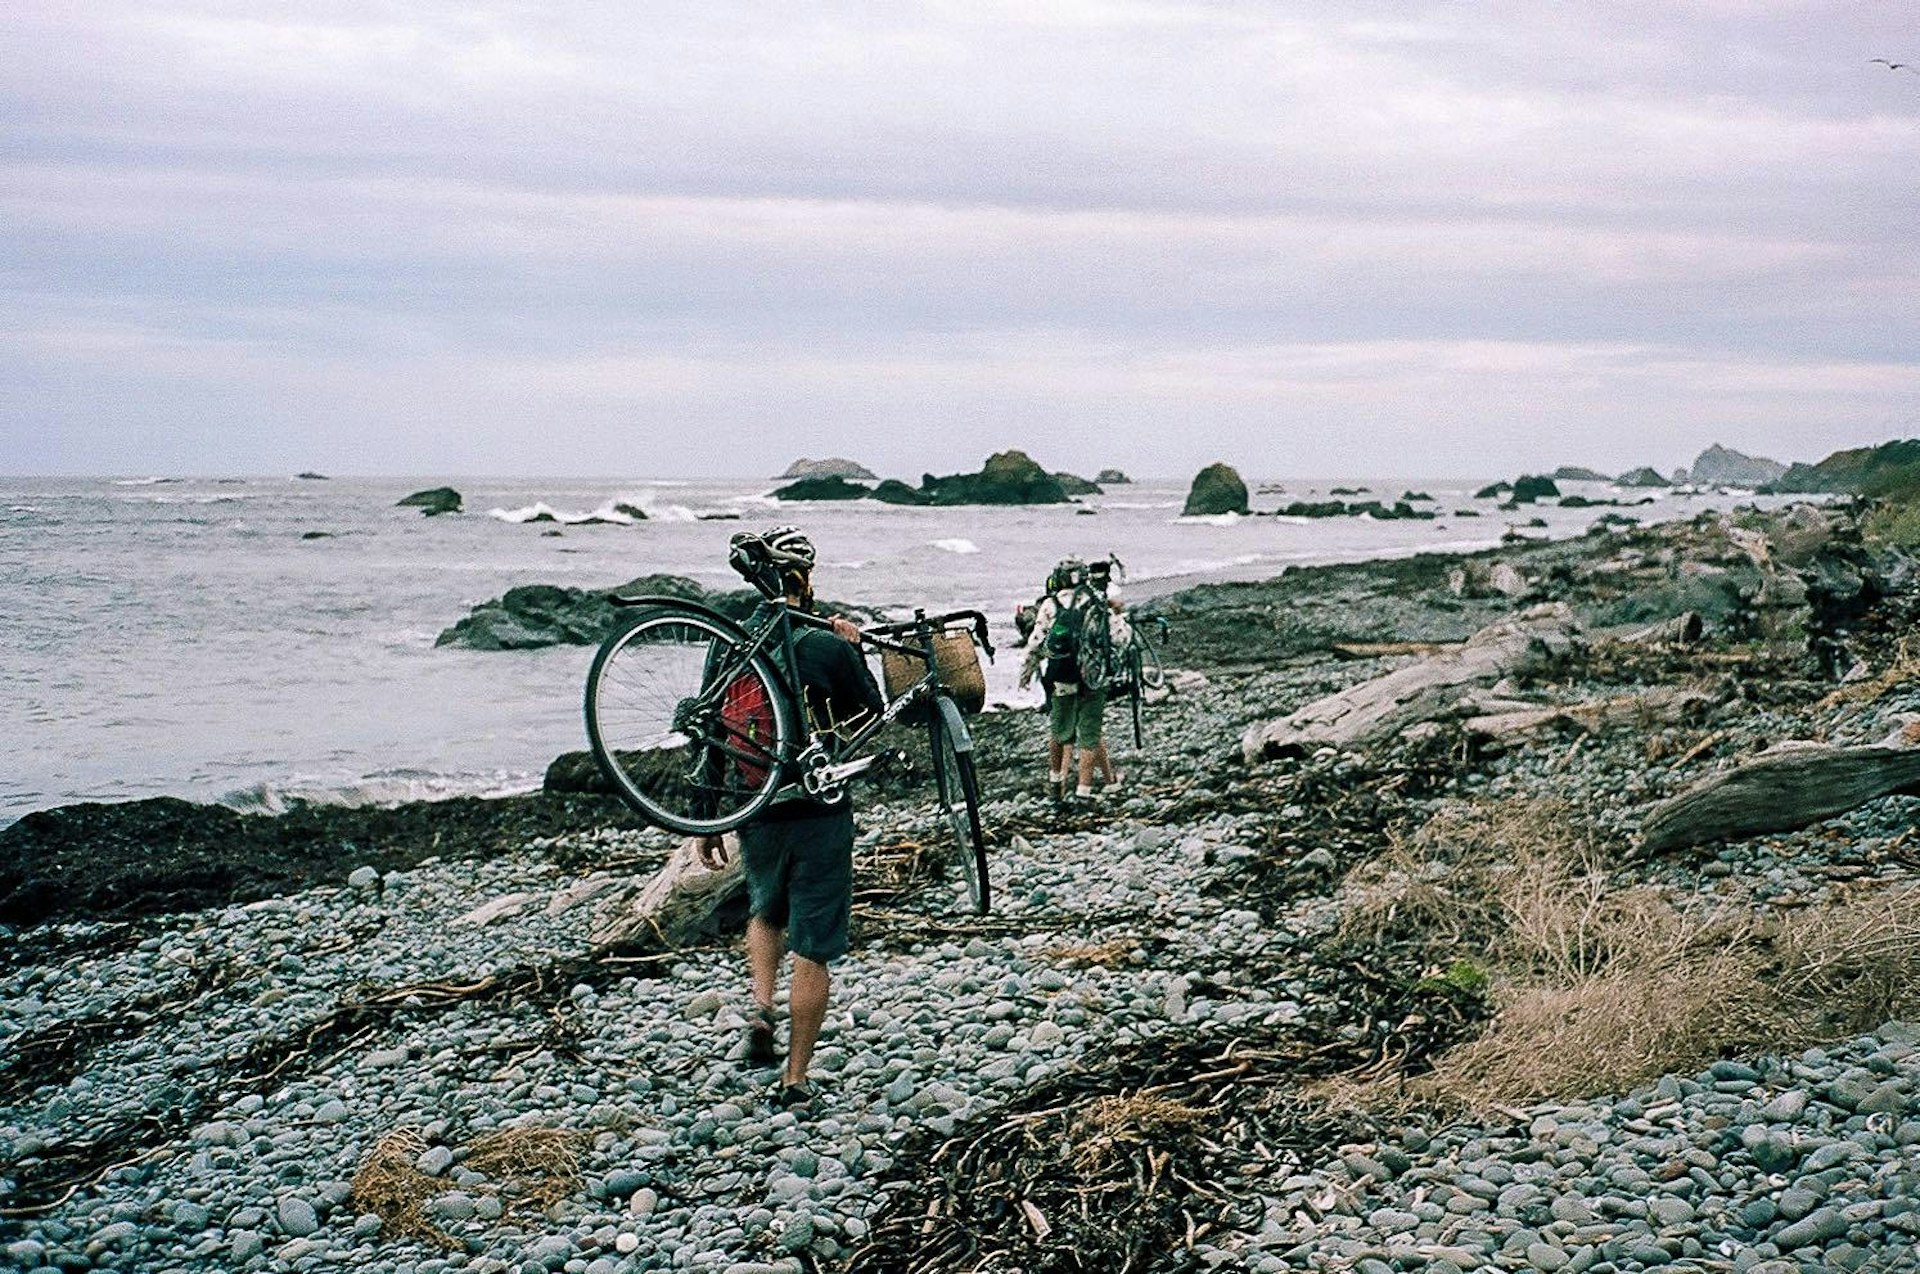 In Pictures: Epic bike journey down the Pacific Coast, from Vancouver to San Diego